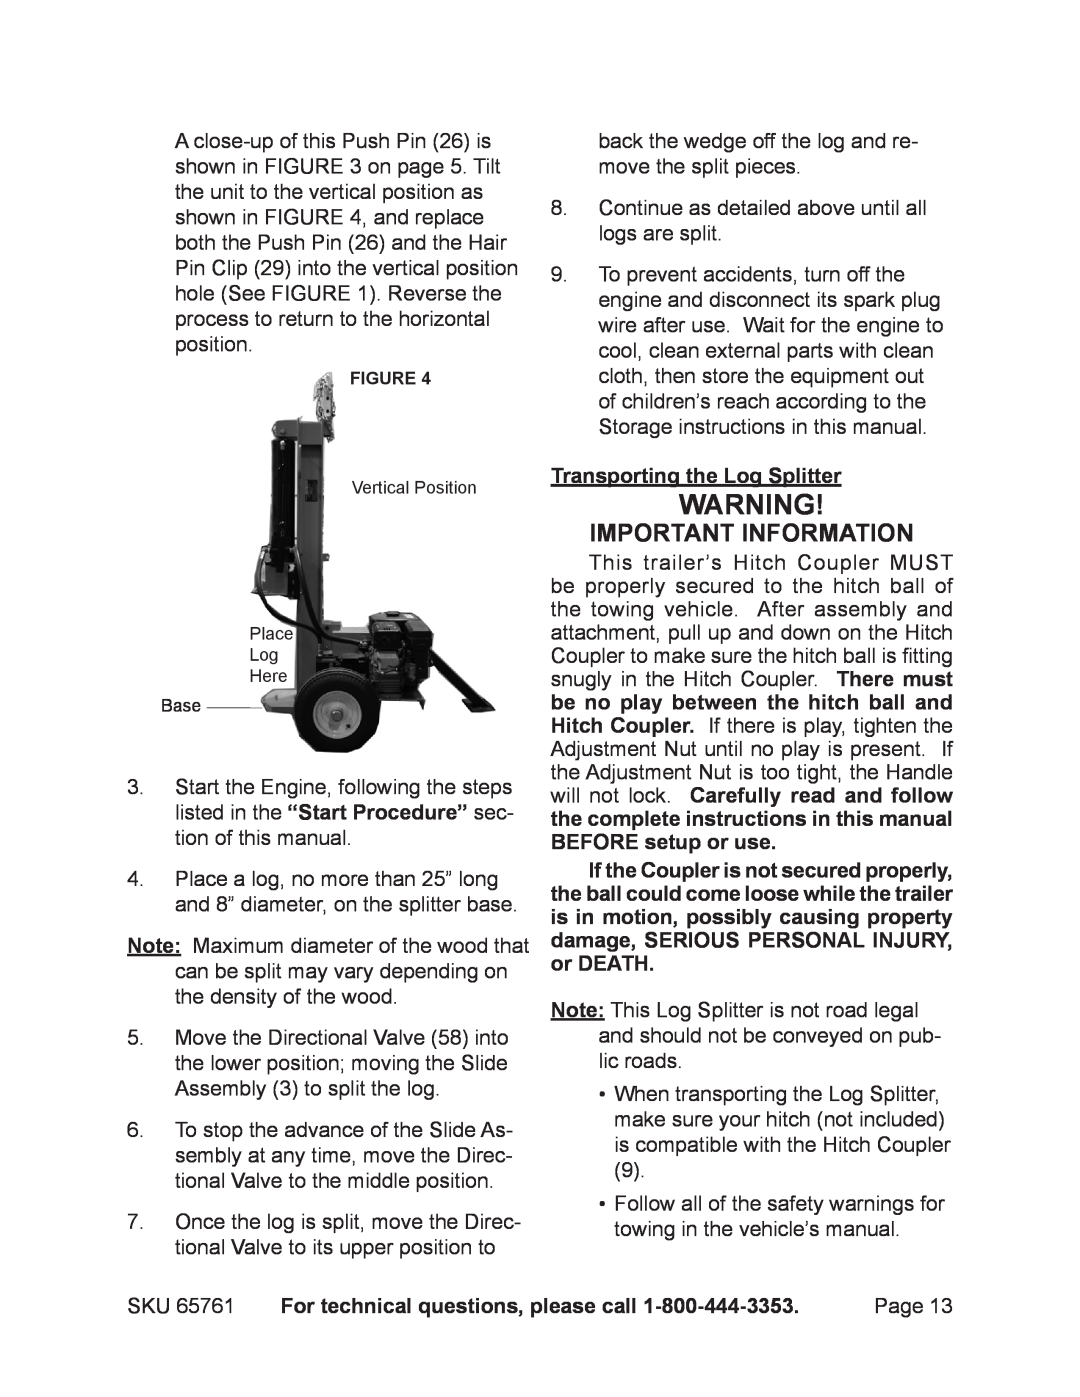 Harbor Freight Tools 65761 Important Information, Transporting the Log Splitter, For technical questions, please call 